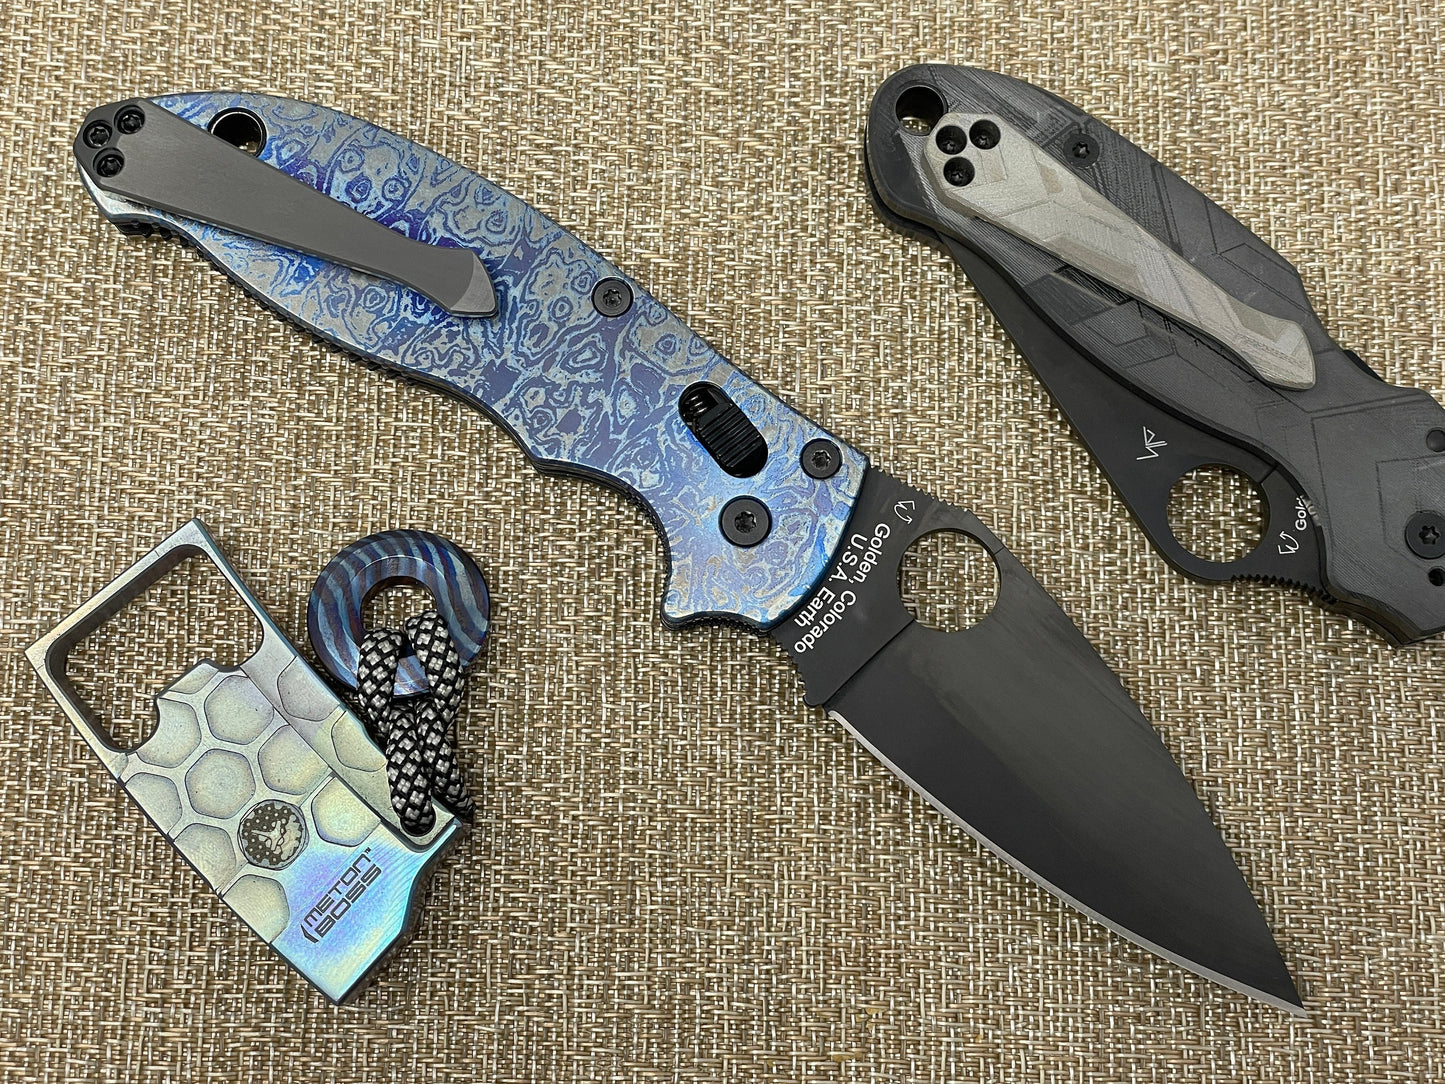 Flamed COMPASS engraved Titanium scales for Spyderco MANIX 2